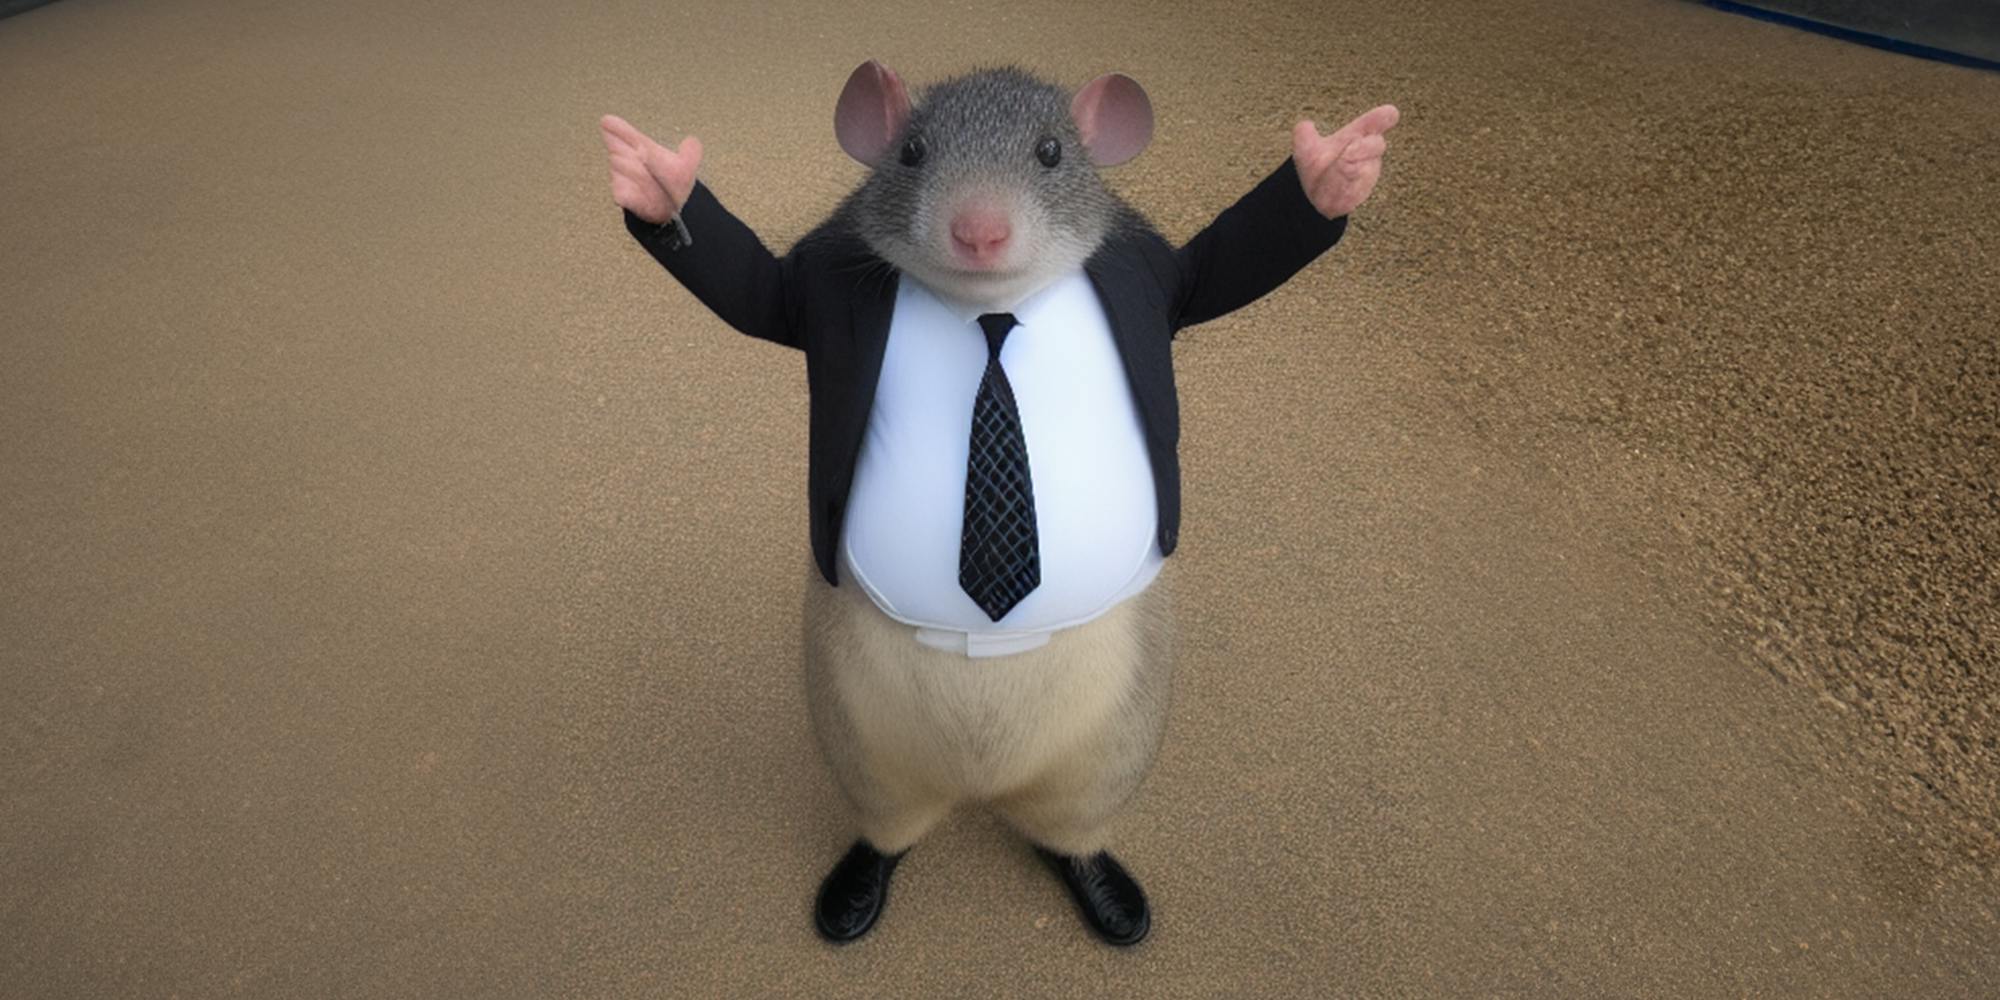 mouse in suit with arms raised